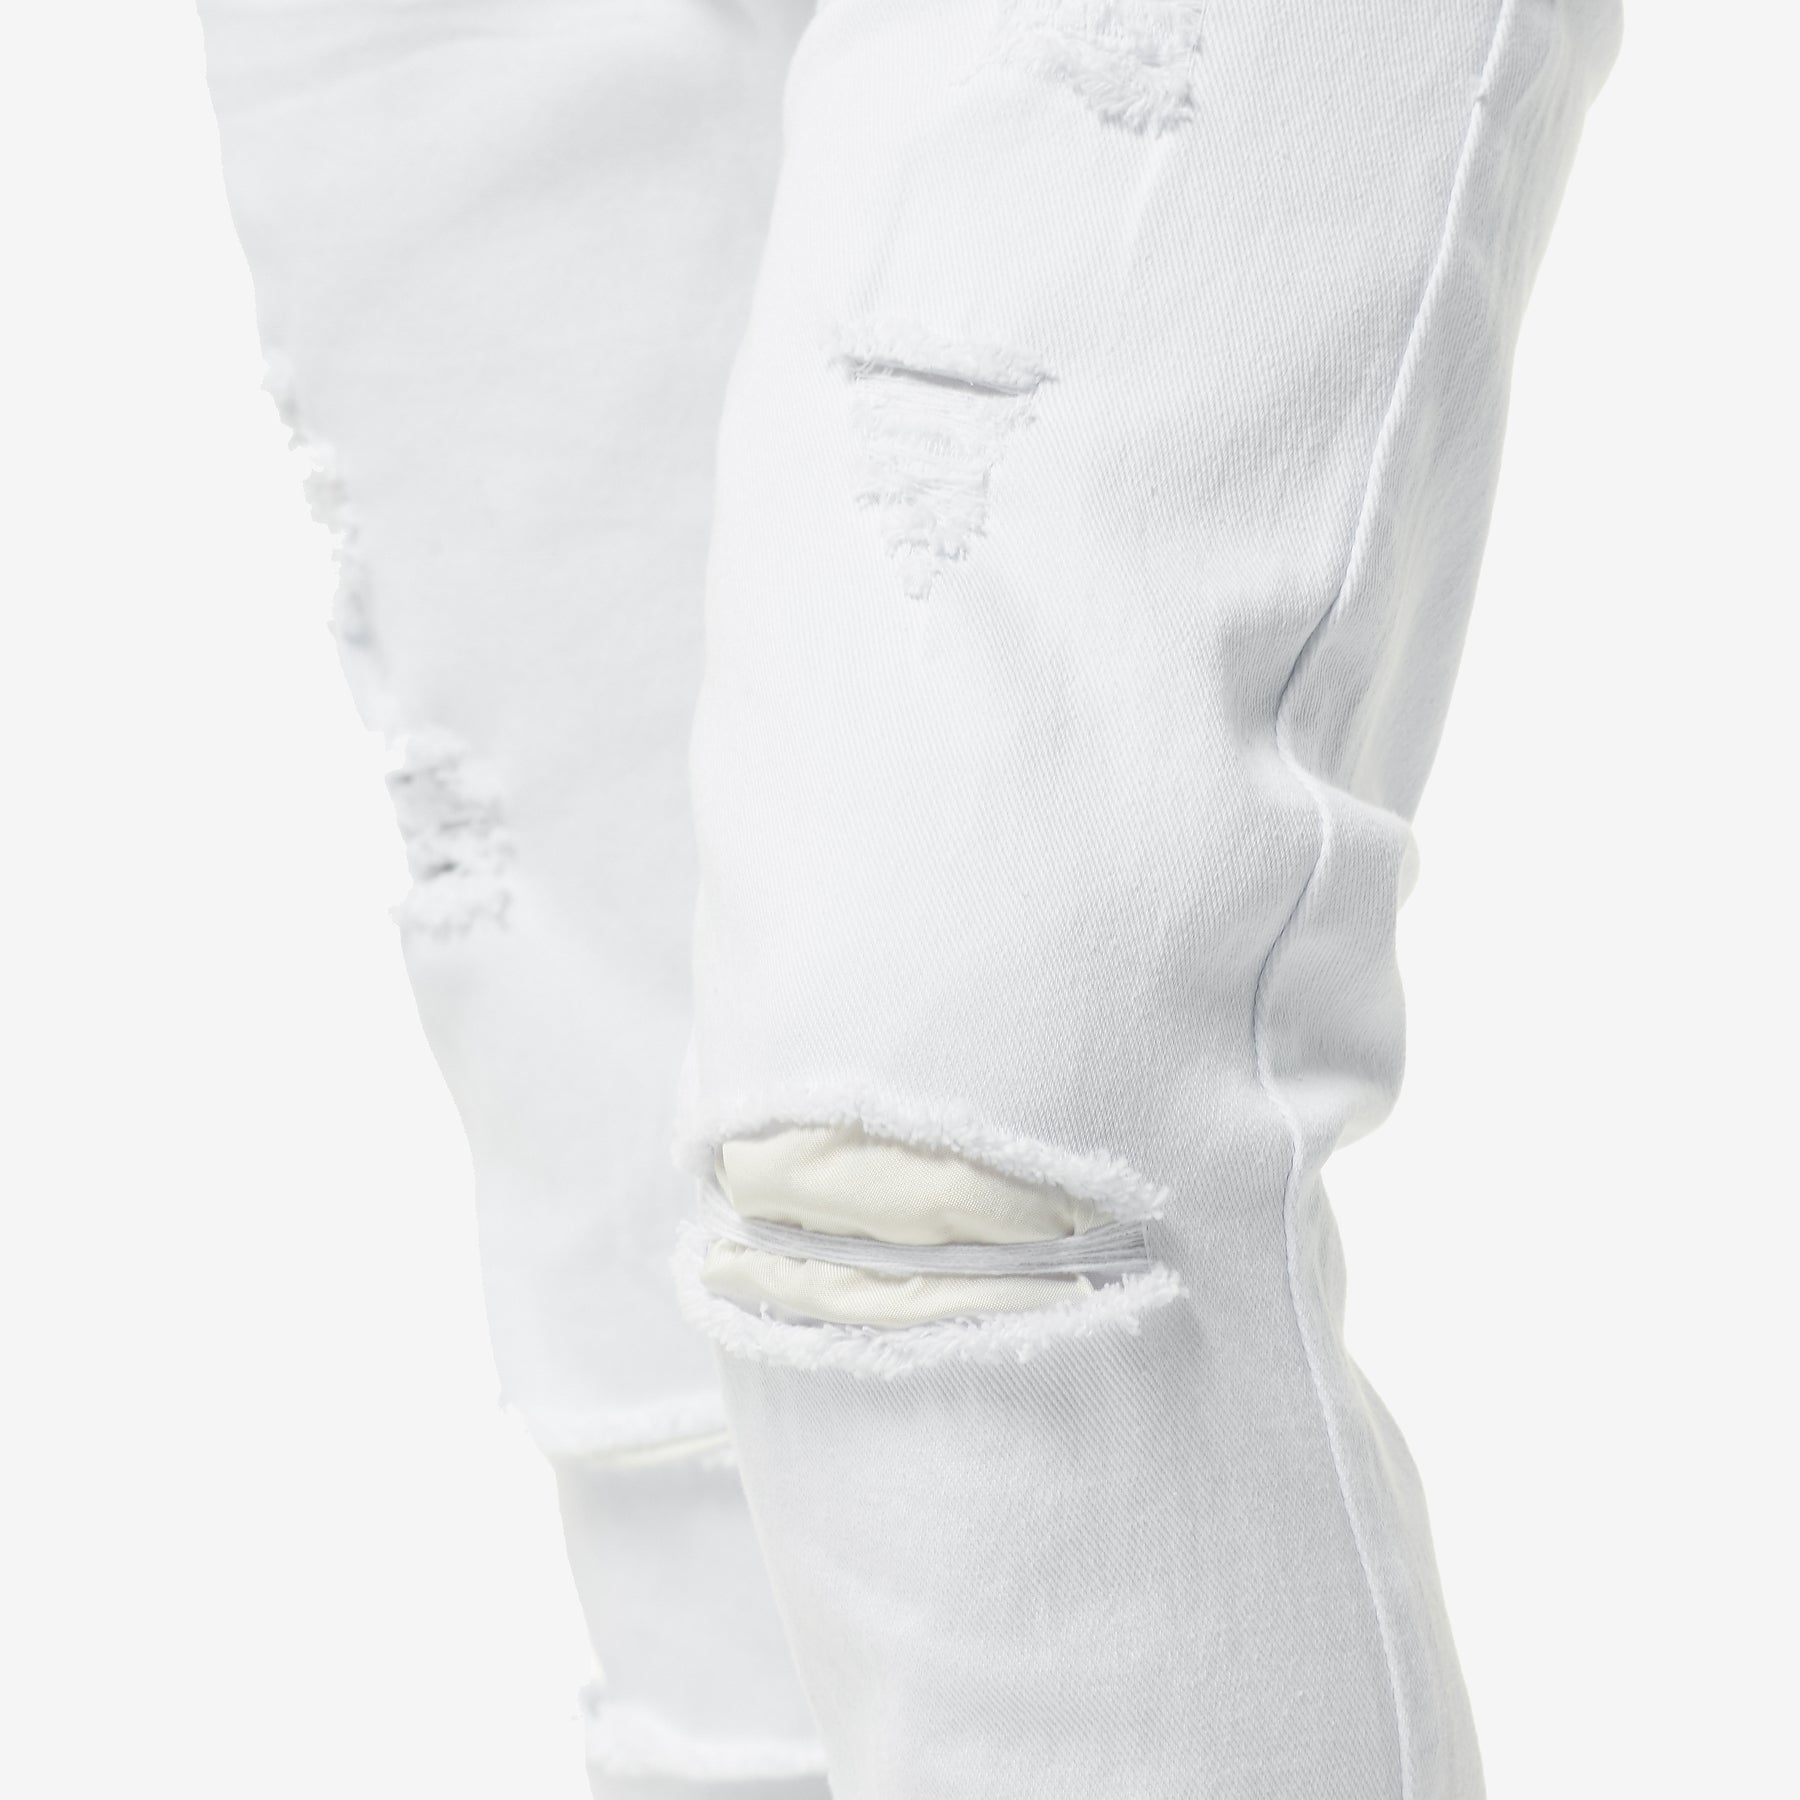 WHITE PANTS WITH RIPS - Copper Rivet